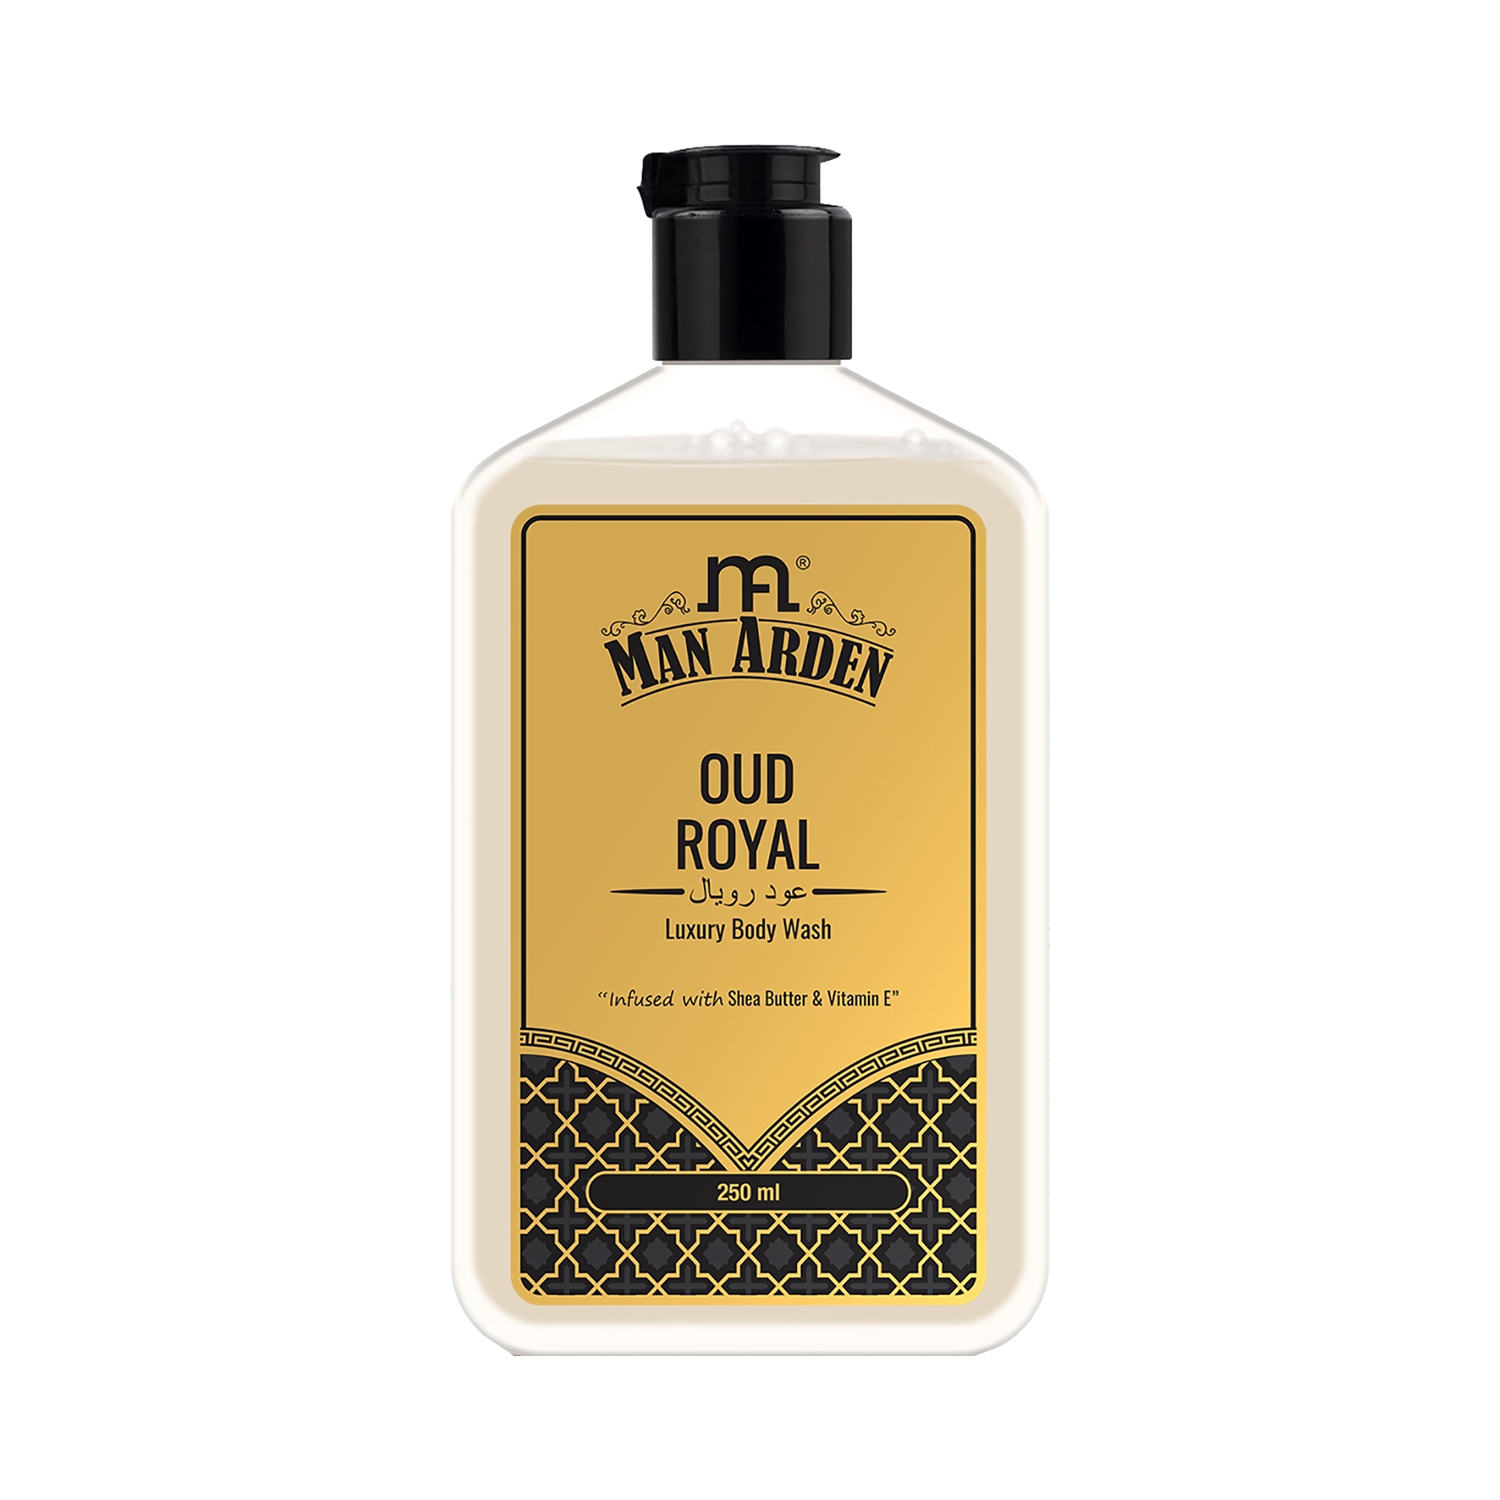 Man Arden | Man Arden Oud Royal Luxury Body Wash Infused With Shea Butter & Vitamin E (250ml)